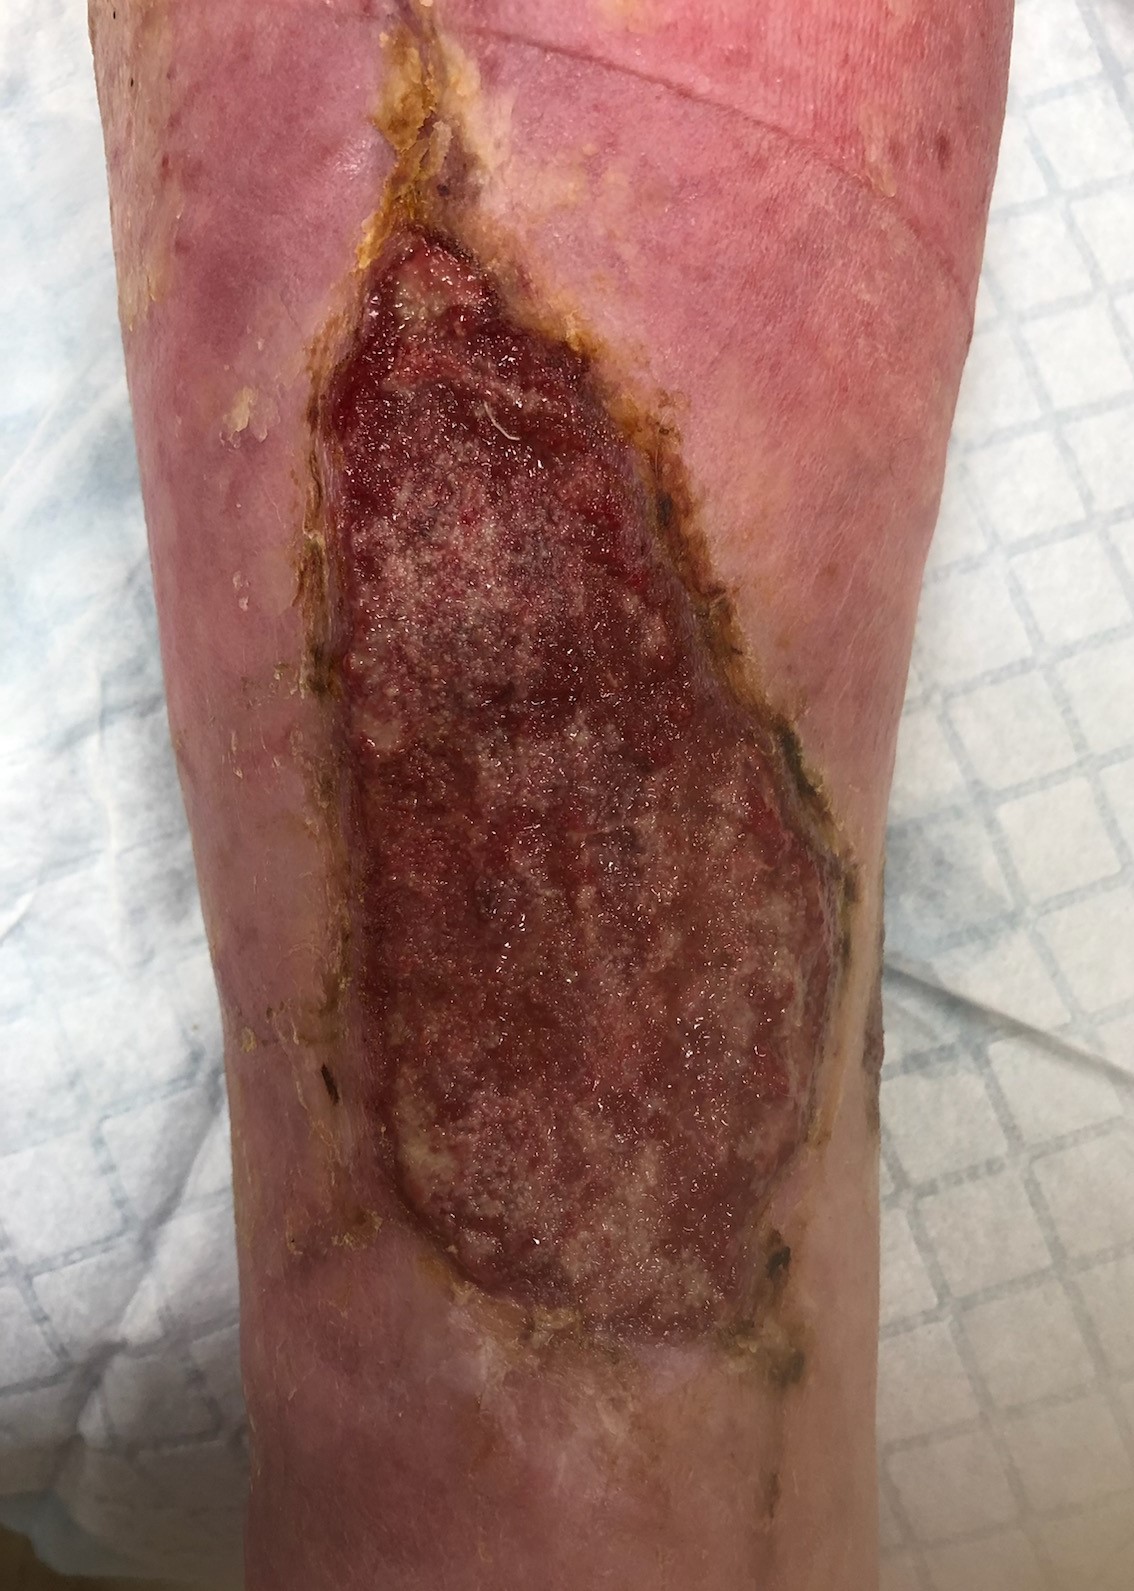 Top wound following first treatment plan with Restore First Health